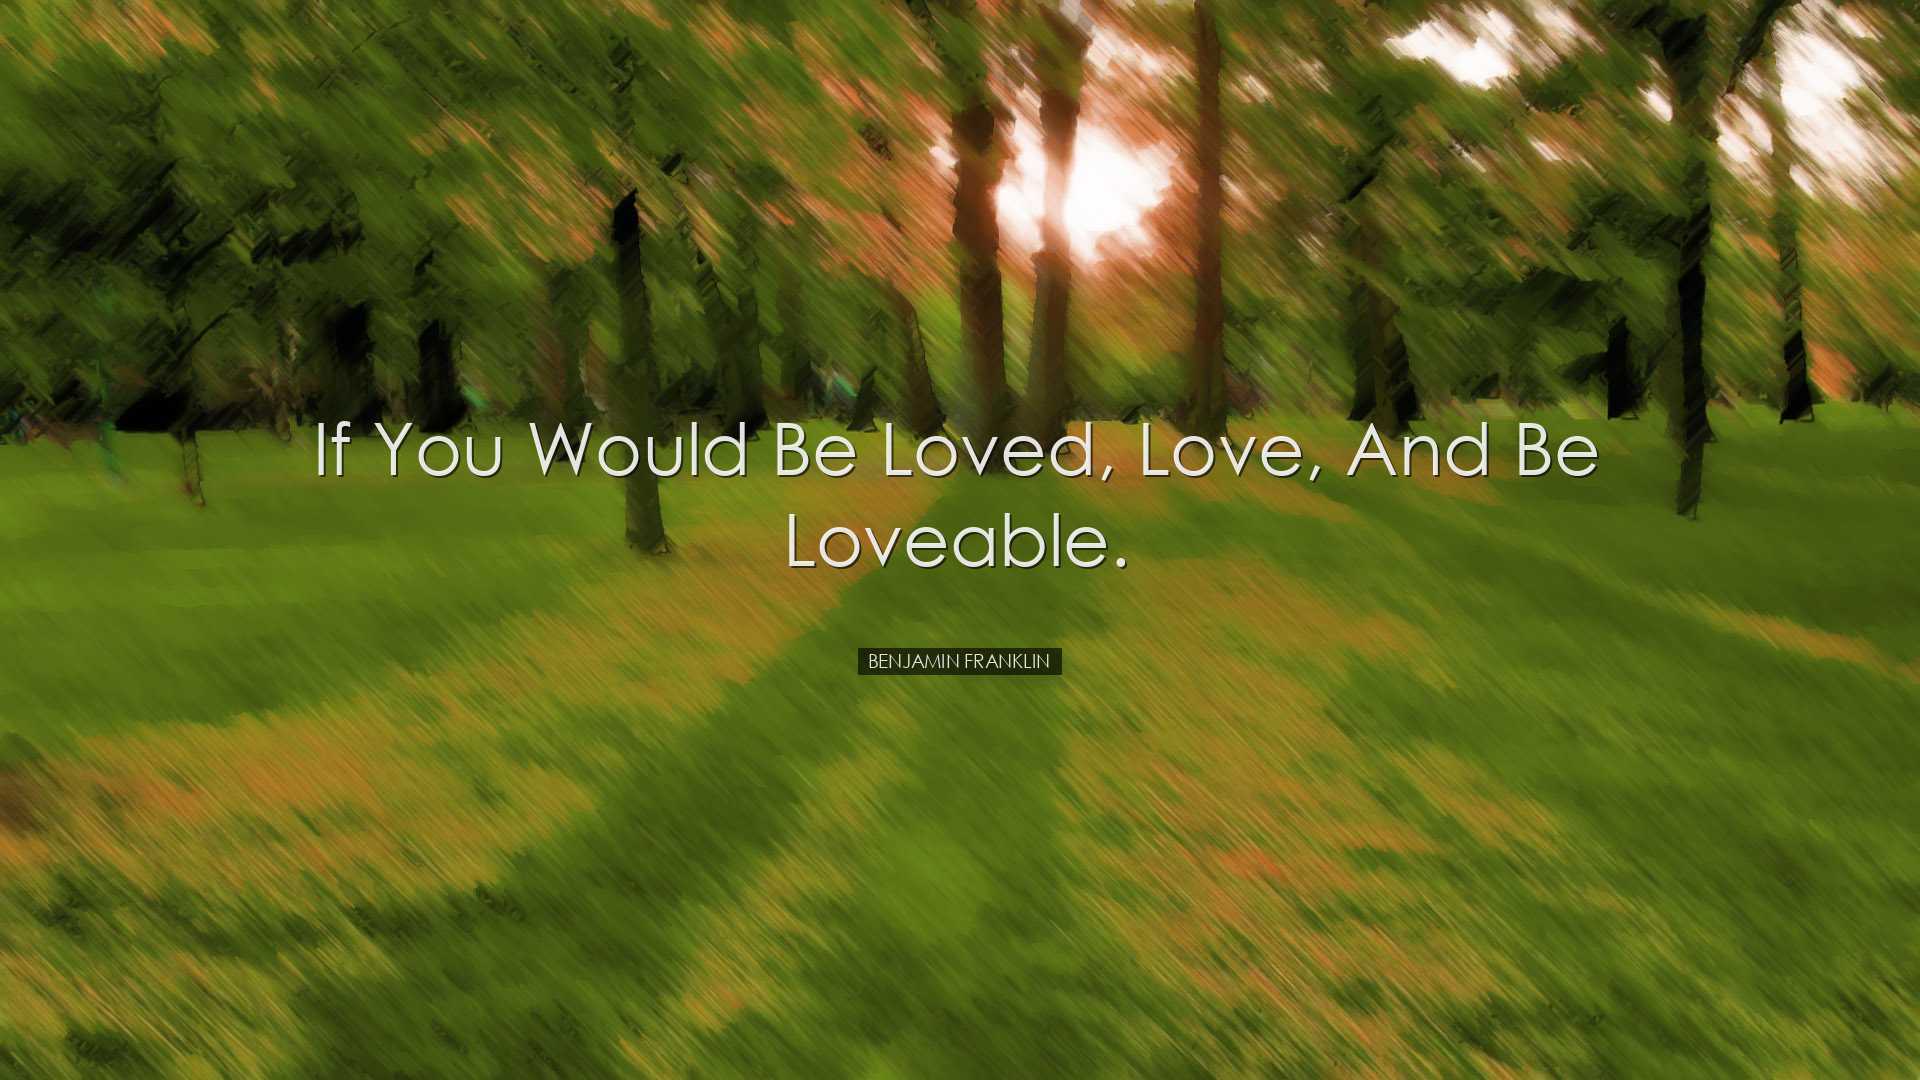 If you would be loved, love, and be loveable. - Benjamin Franklin